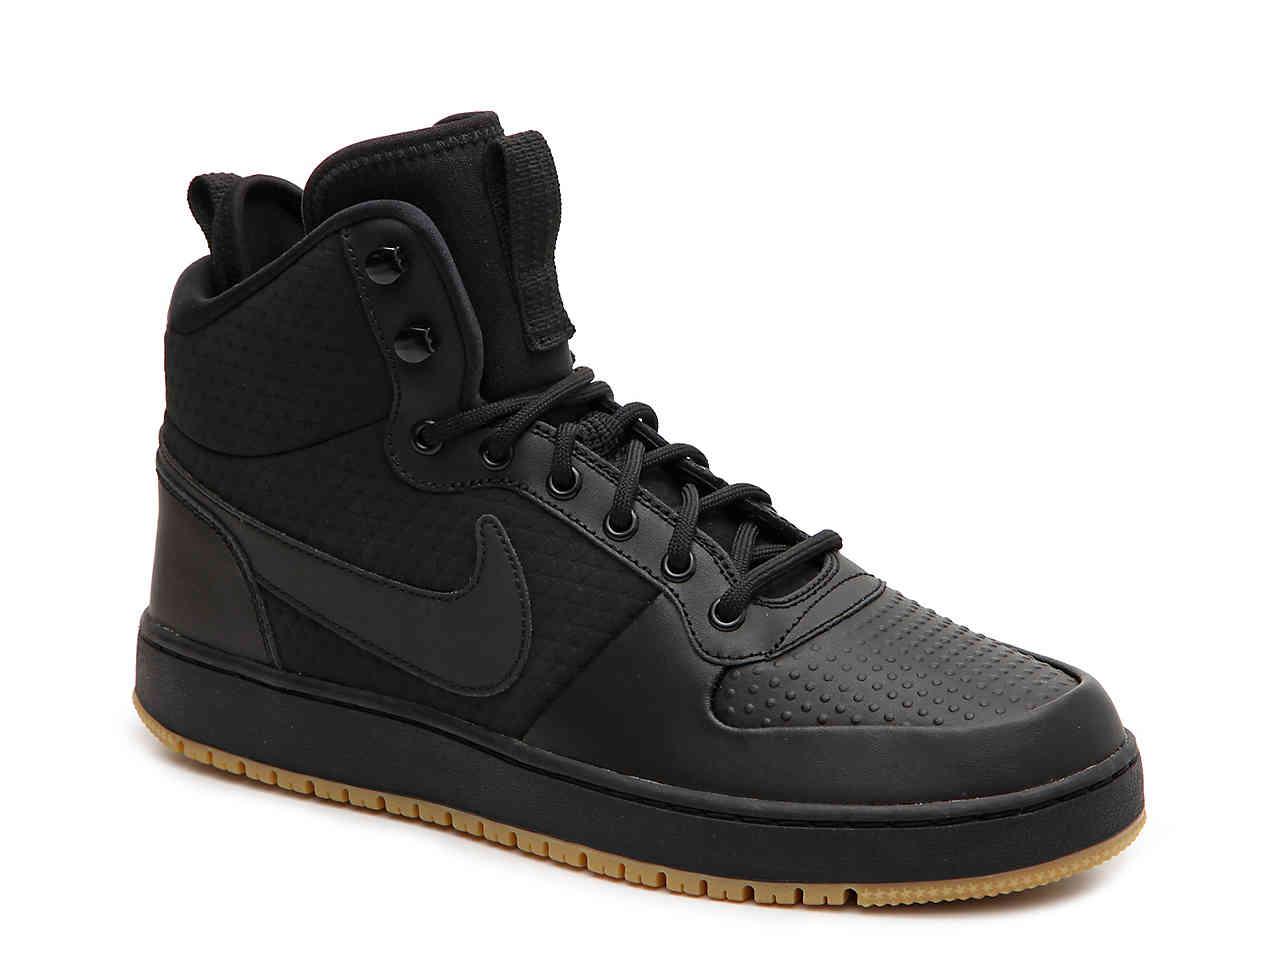 behave Less Attendance nike black leather high tops Competitors bang wrench